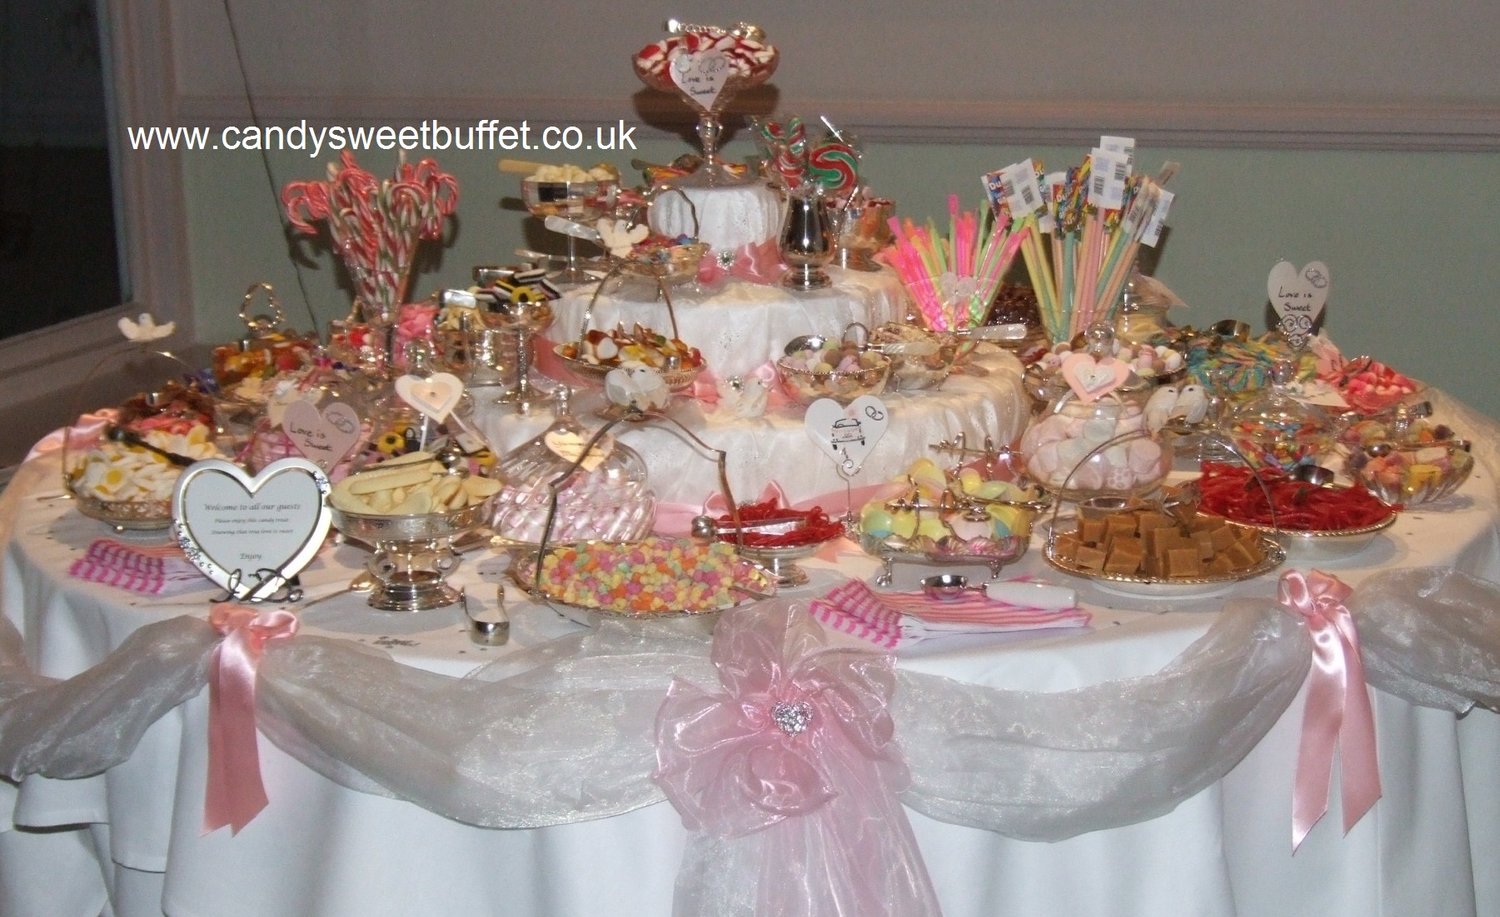 Wide range of sweets availabe for wedding sweets buffet table hire